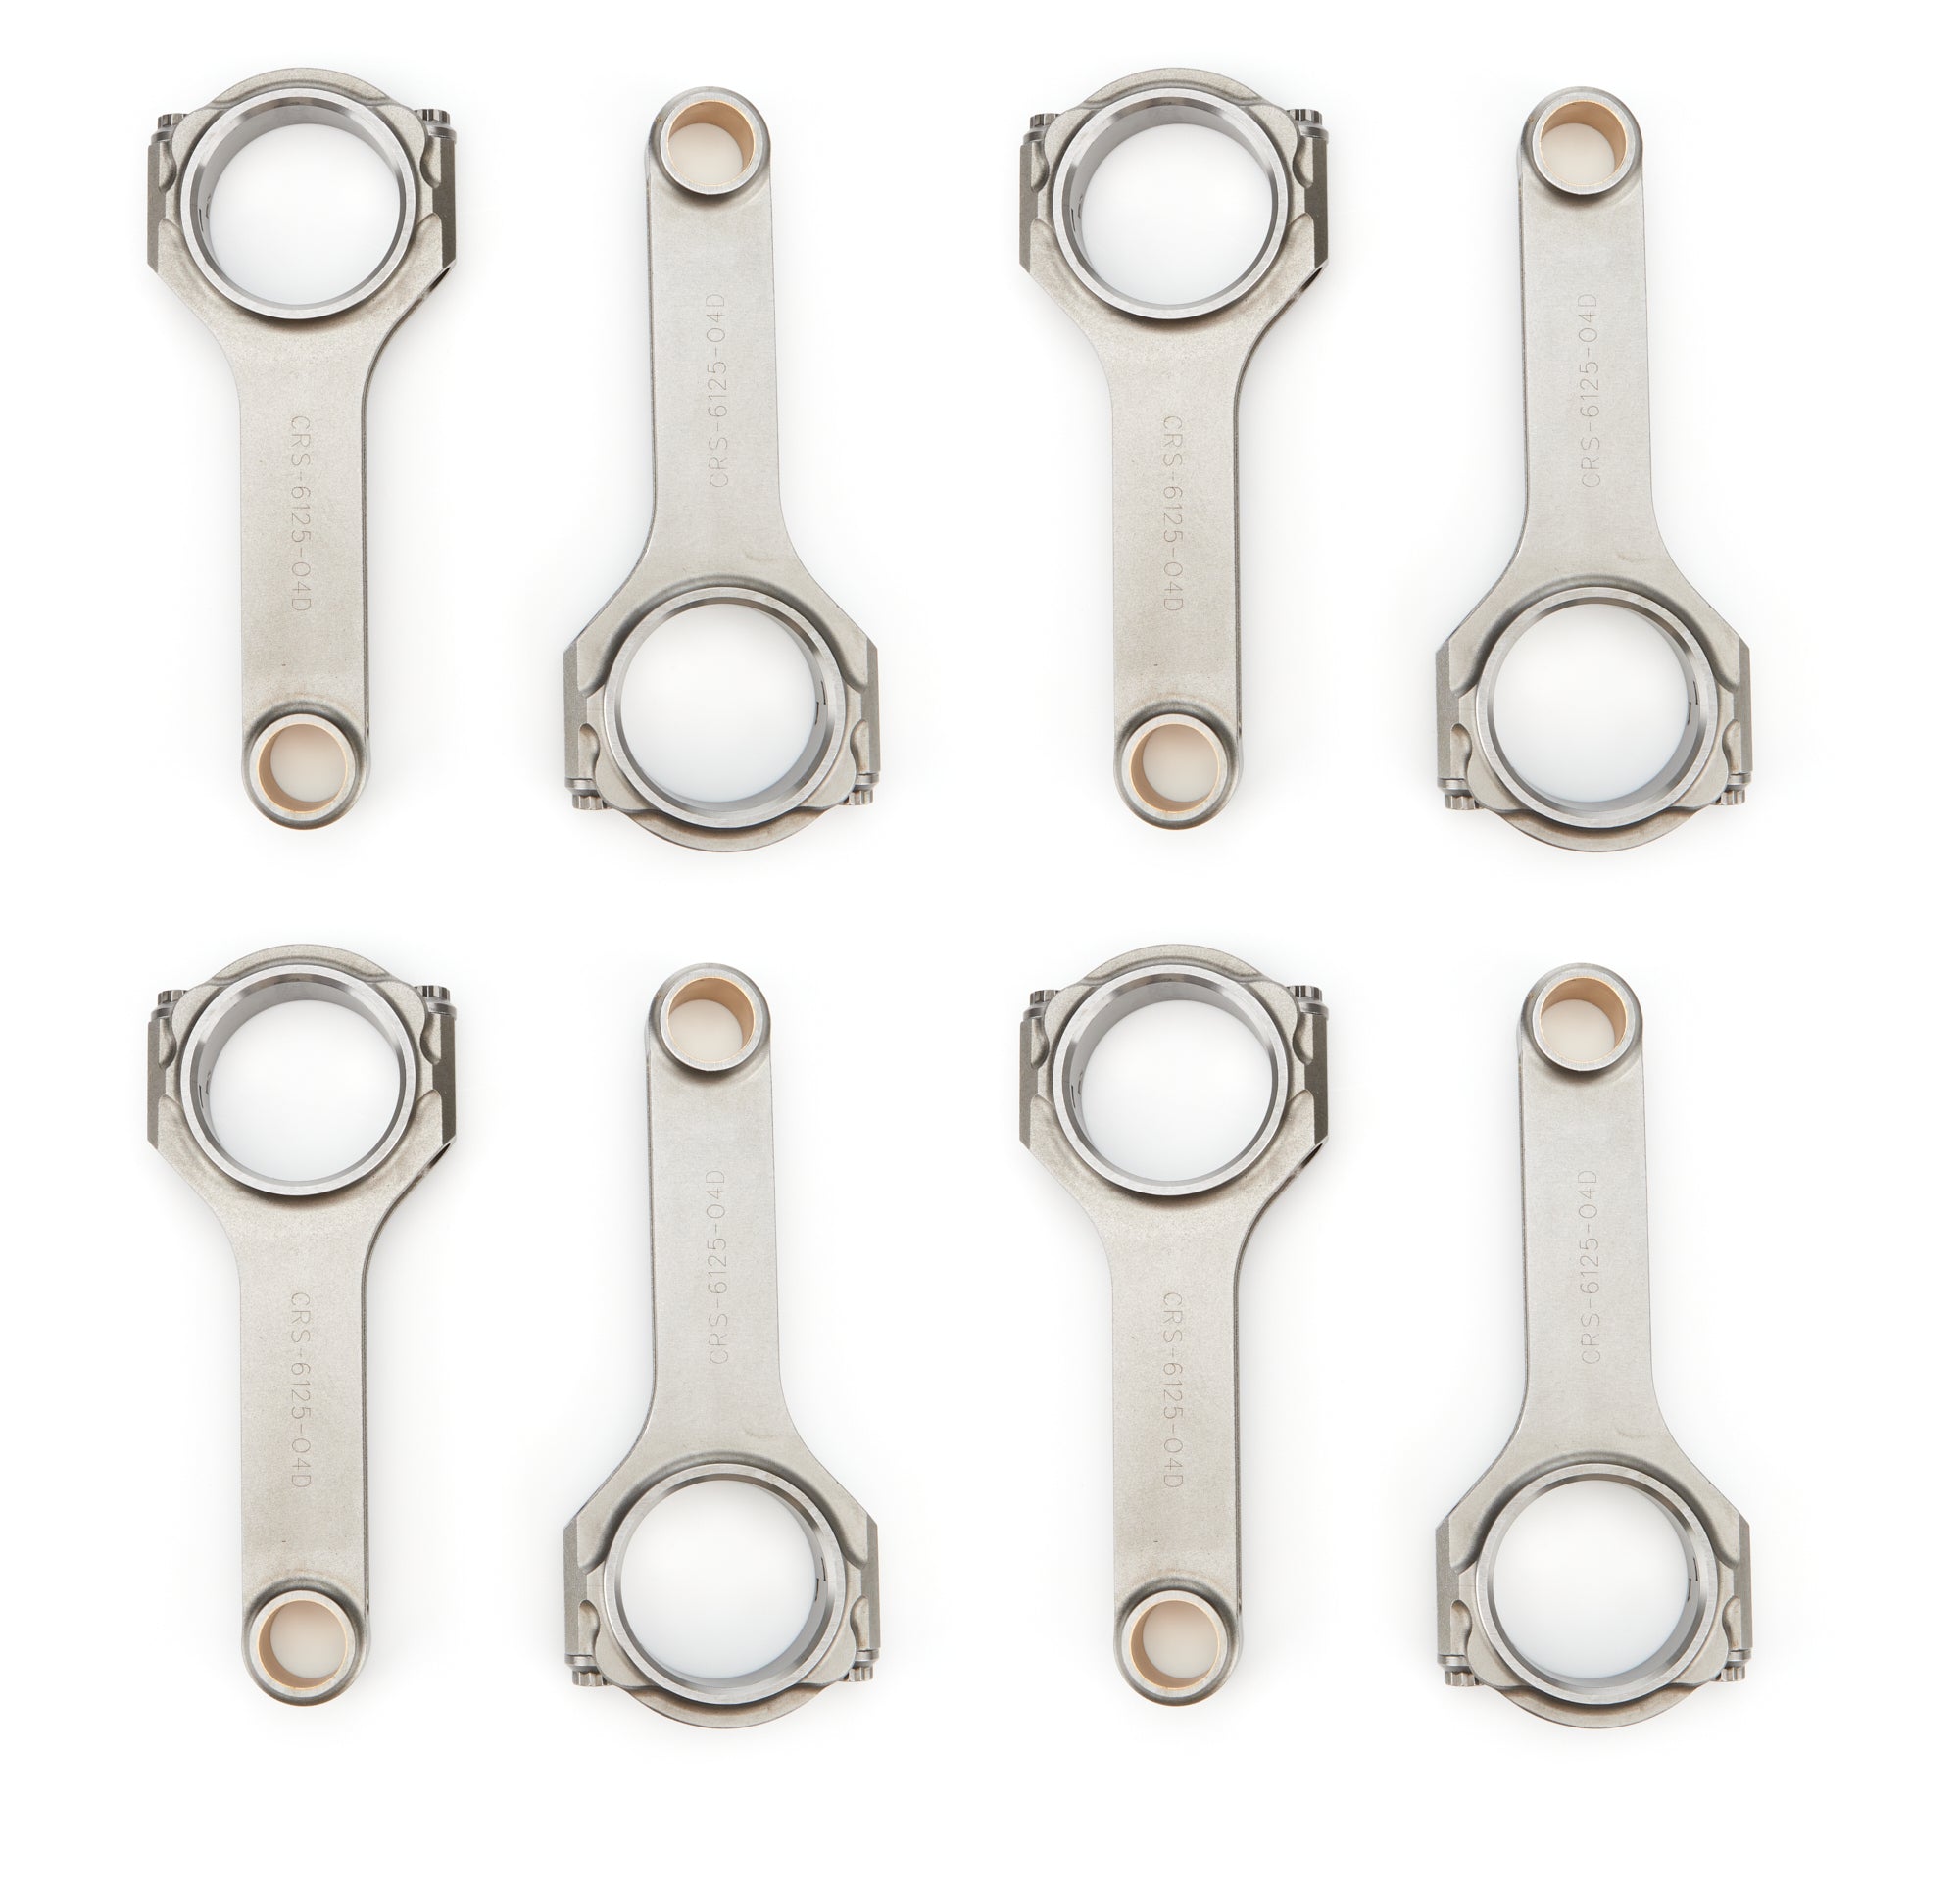 Eagle GM LS 4340 H-Beam Rod Set 6.125 4th-Gen Connecting Rods and Components Connecting Rods main image